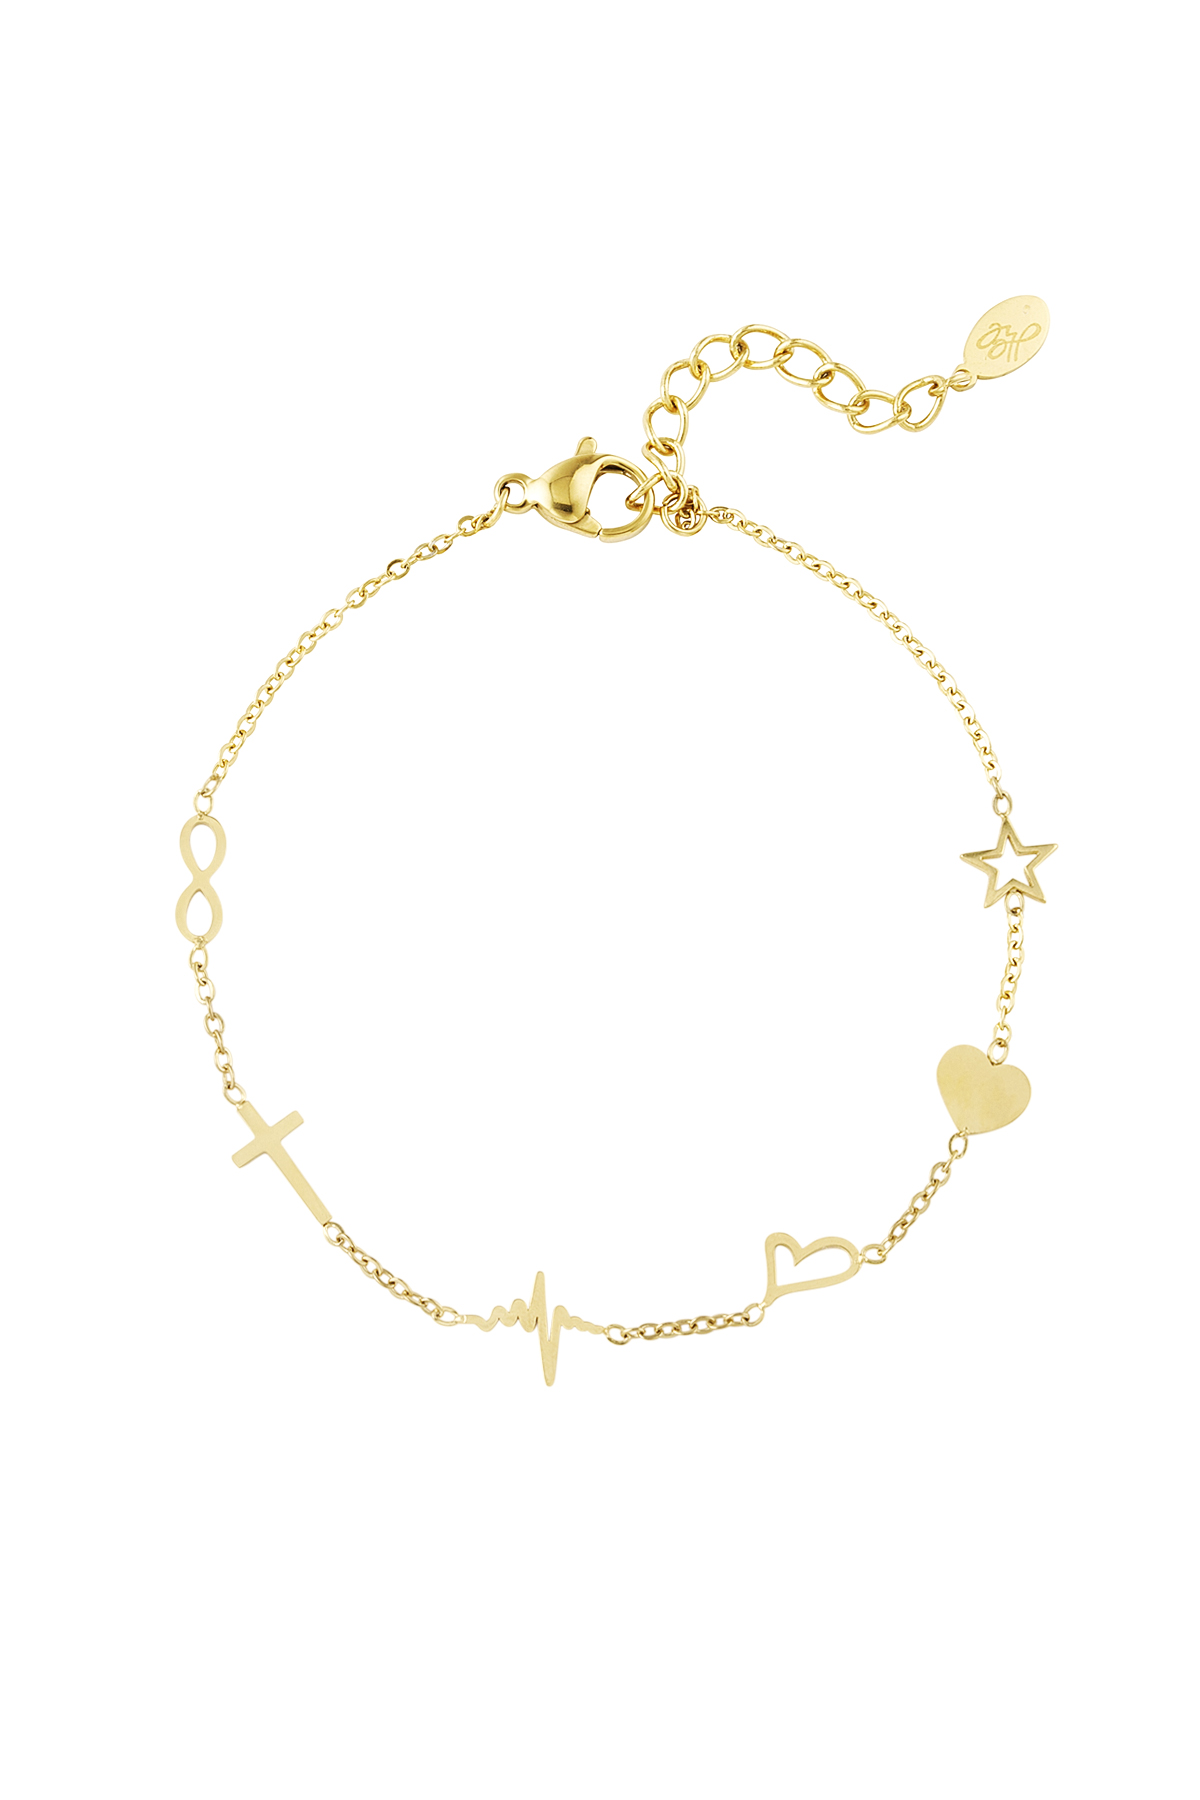 Armband-Charms - Gold Edelstahl